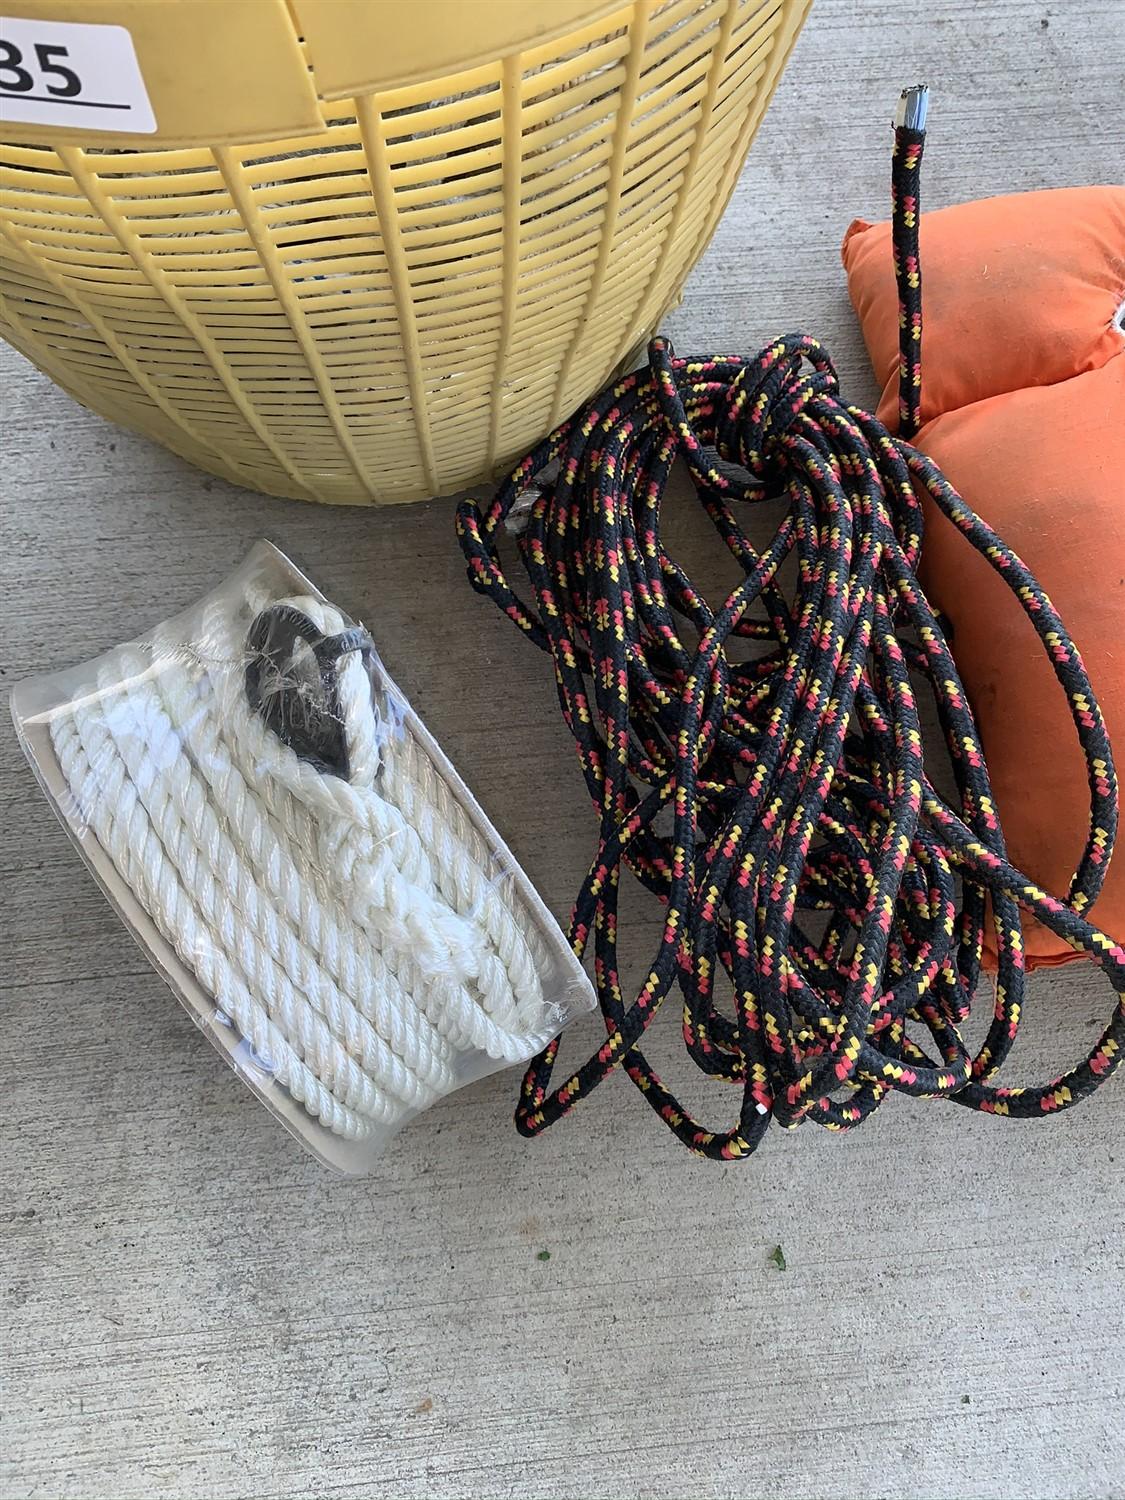 Boat Rope, Anchor Line, Life Jacket